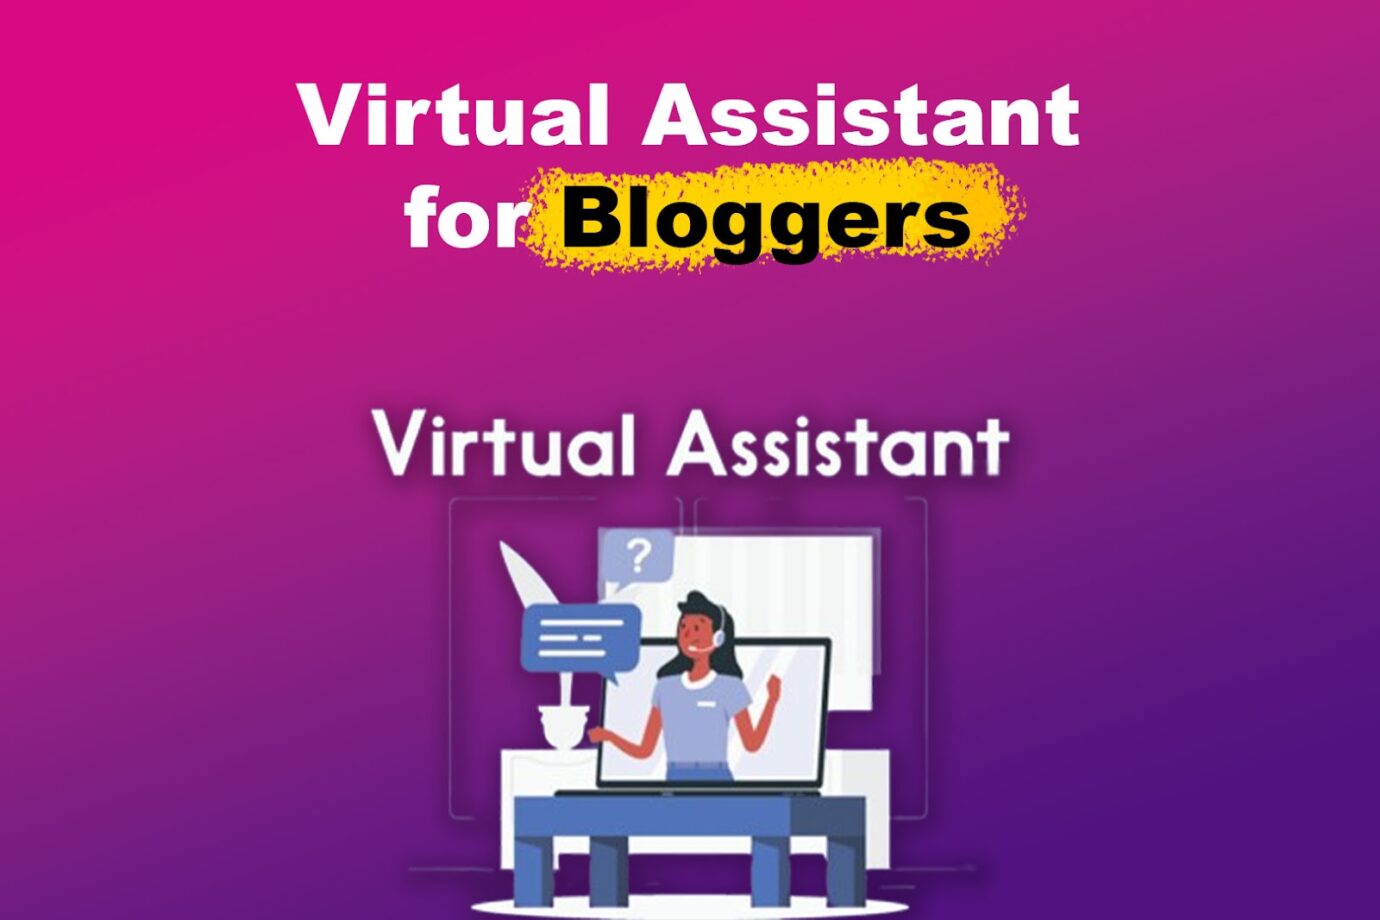 Virtual Assistant for Bloggers